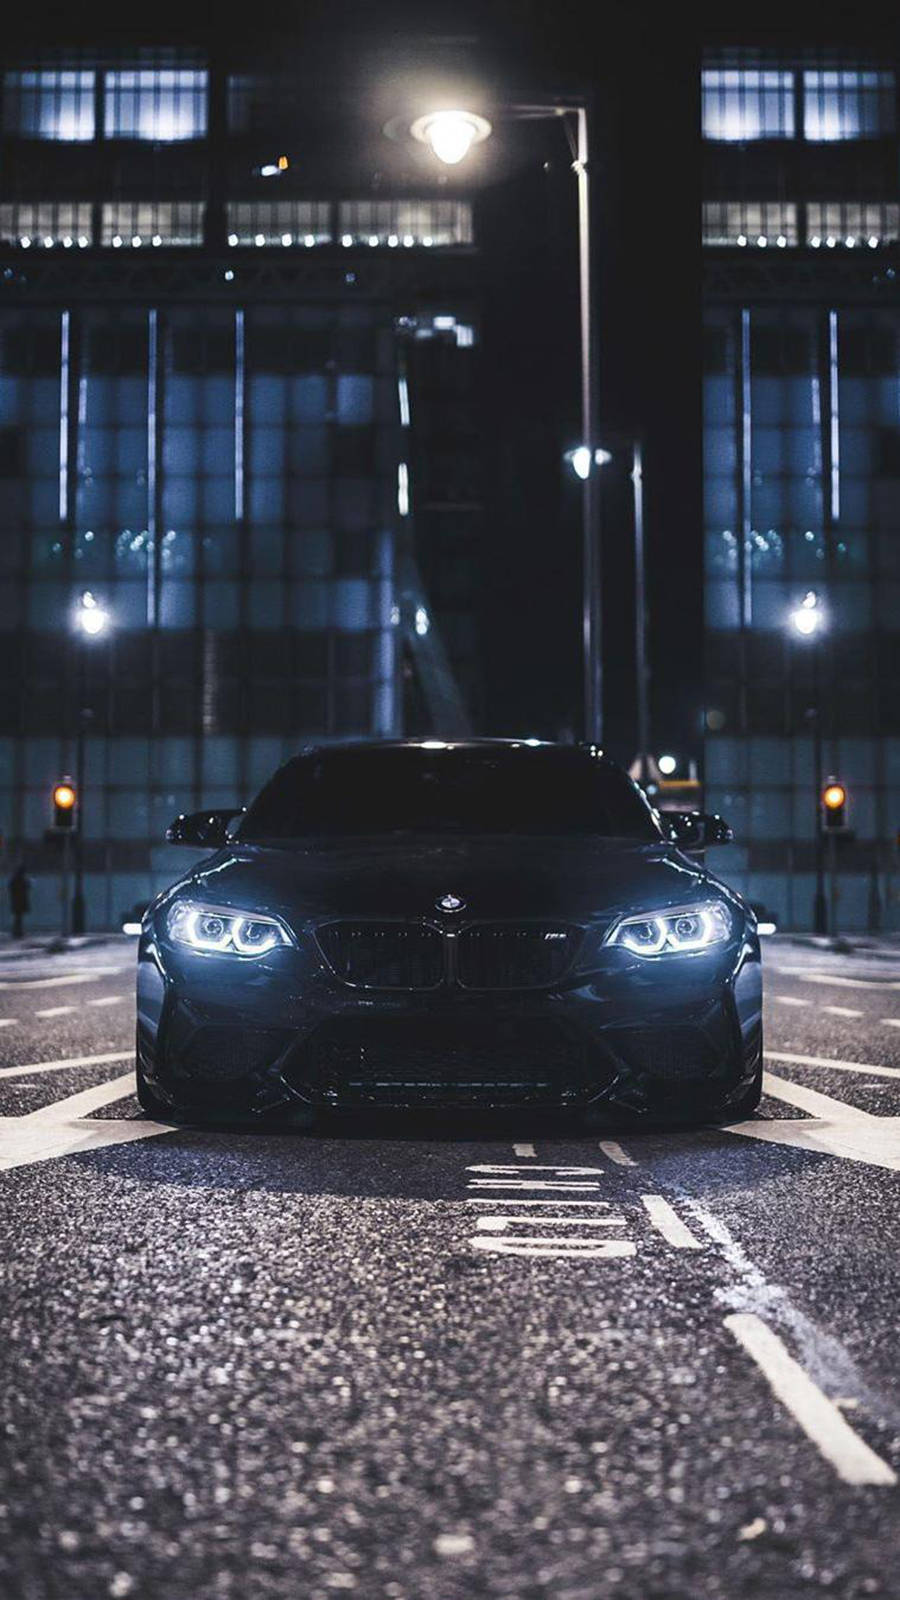 Bmw M2 Night Edition iPhone Wallpaper with high-resolution 1080x1920 pixel. You can use this wallpaper for your iPhone 5, 6, 7, 8, X, XS, XR backgrounds, Mobile Screensaver, or iPad Lock Screen - BMW